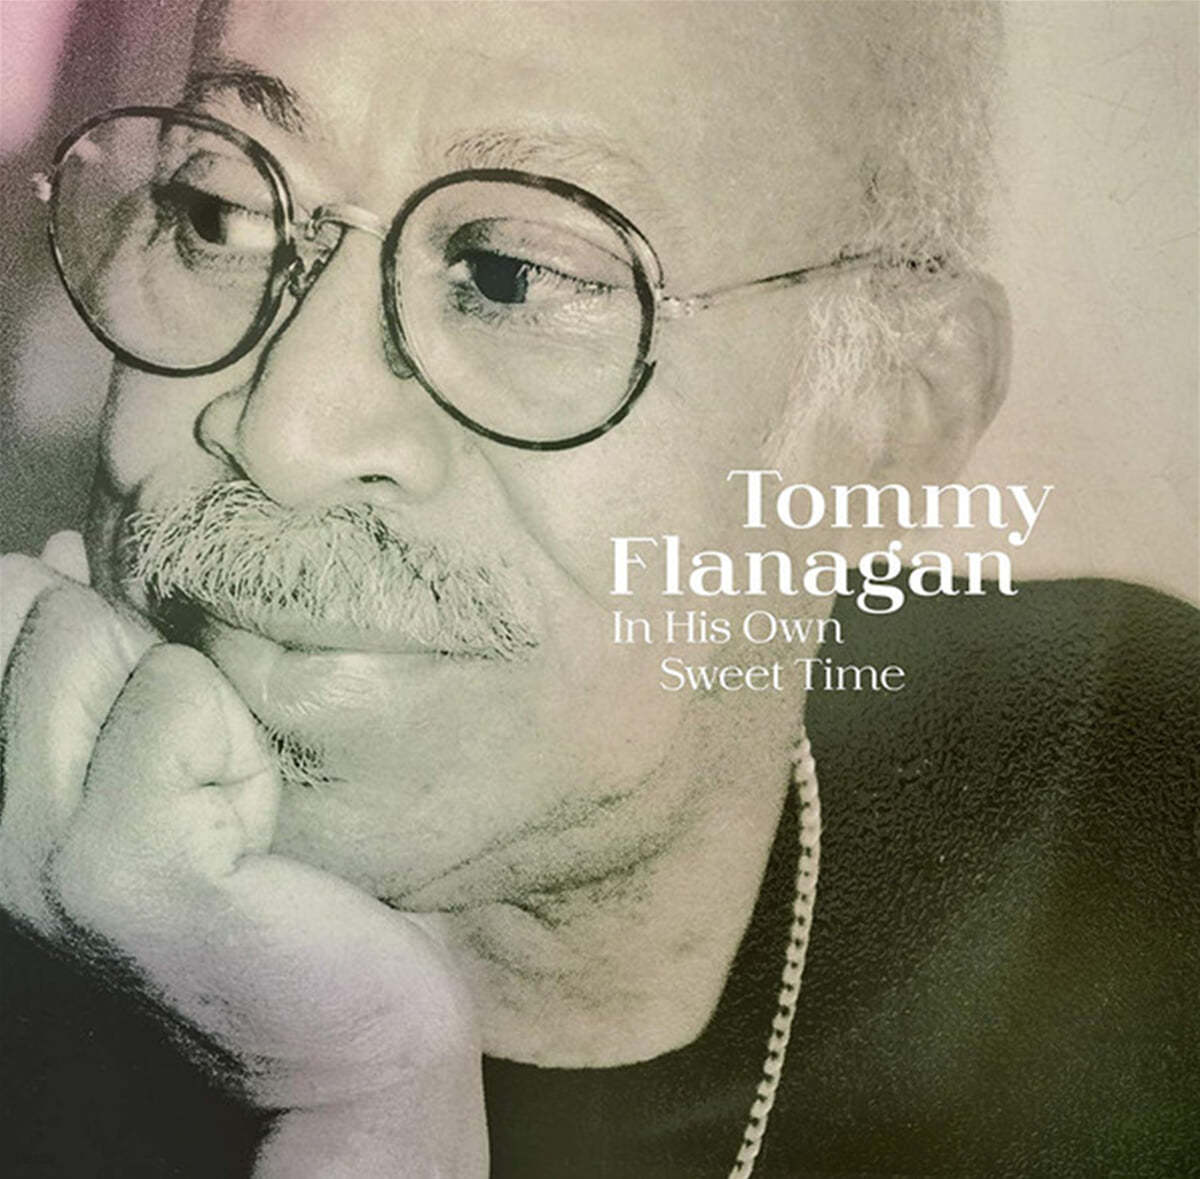 Tommy Flanagan (토미 플래너건) - In His Own Sweet Time [LP]